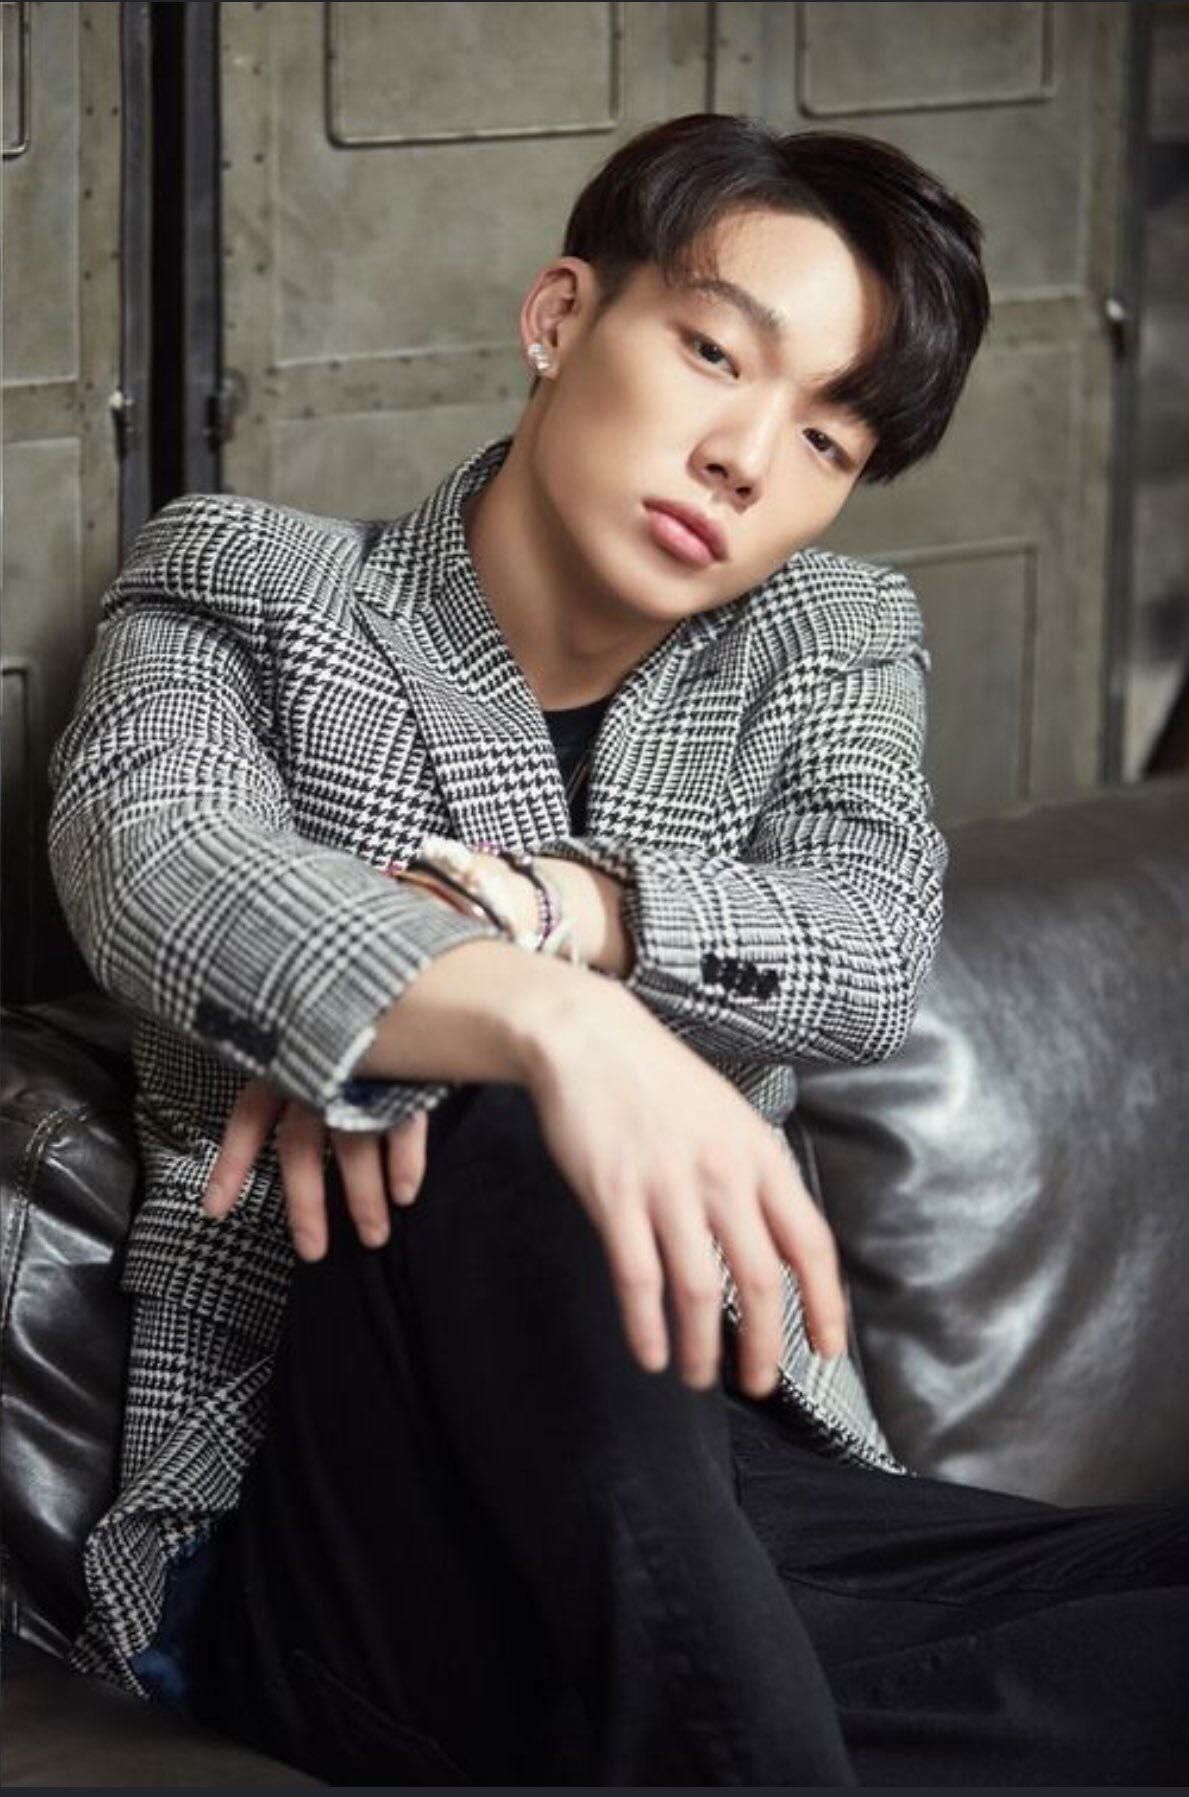 ikon-bobby-to-participate-in-ost-part6-of-tvn-record-of-youth-2